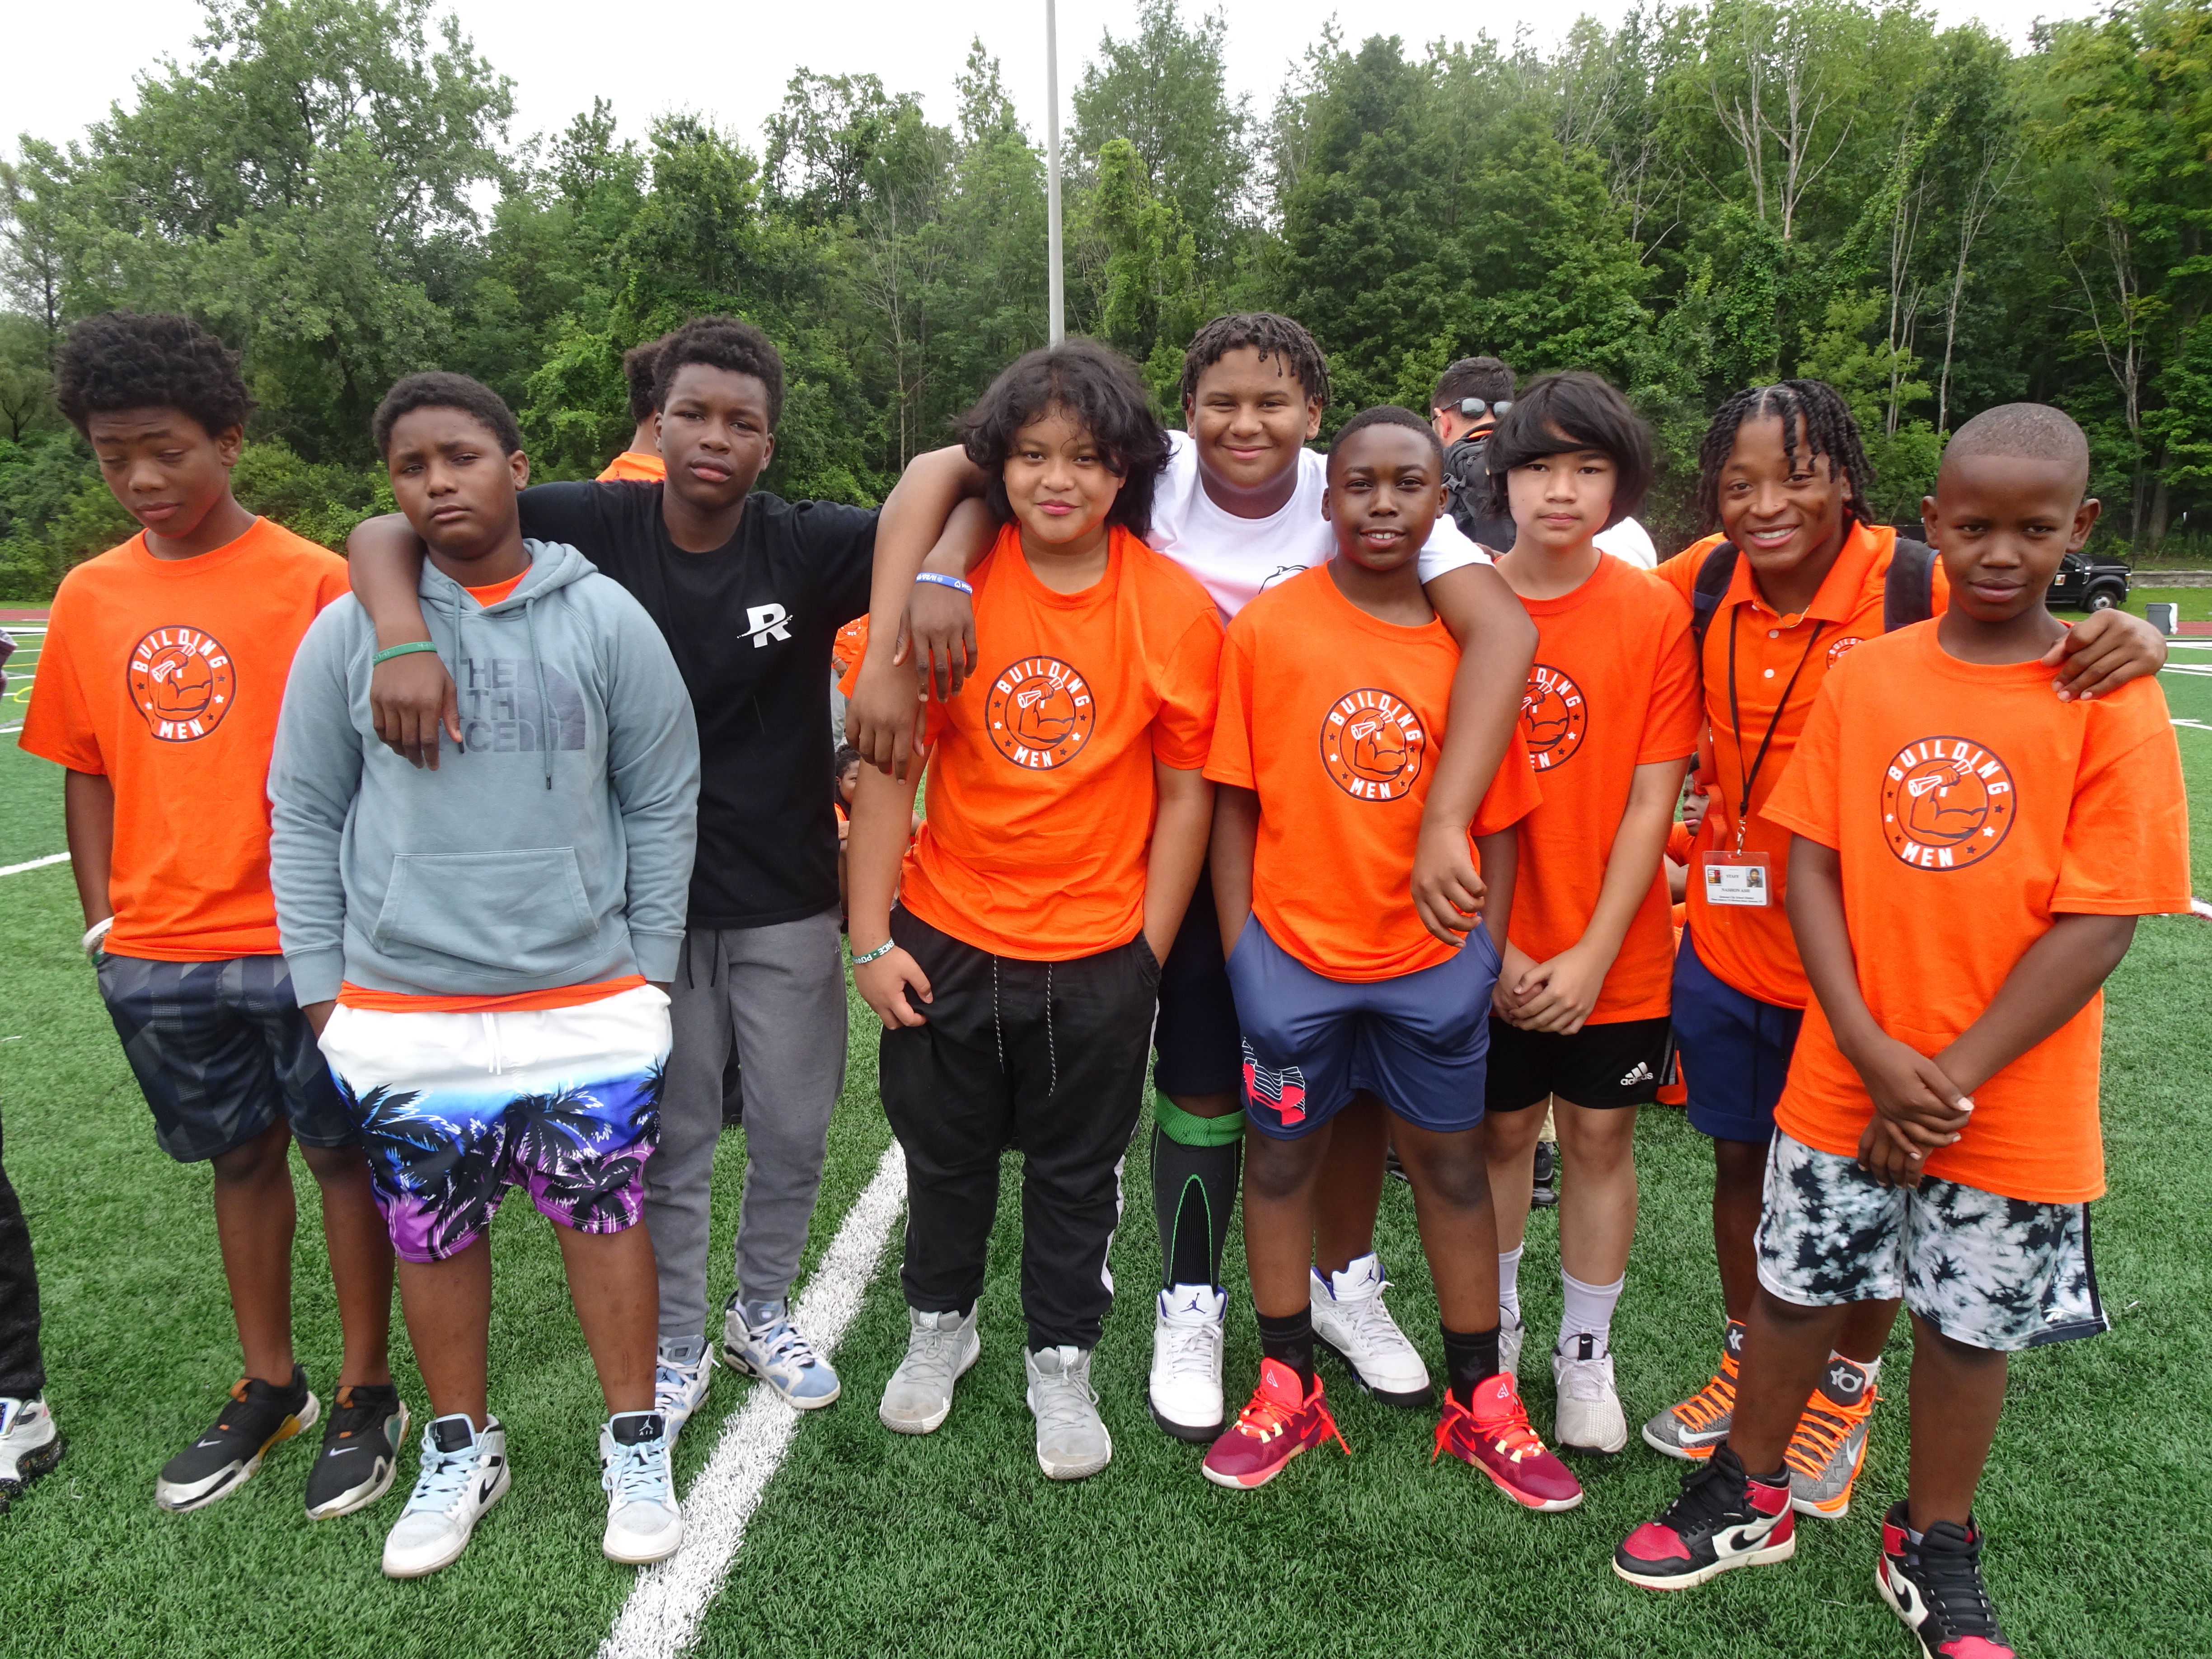 This is a photo of a group of Building Men Progra, middle school students, wearing matching orange shirts, standing in a huddle and smiling at the camera.